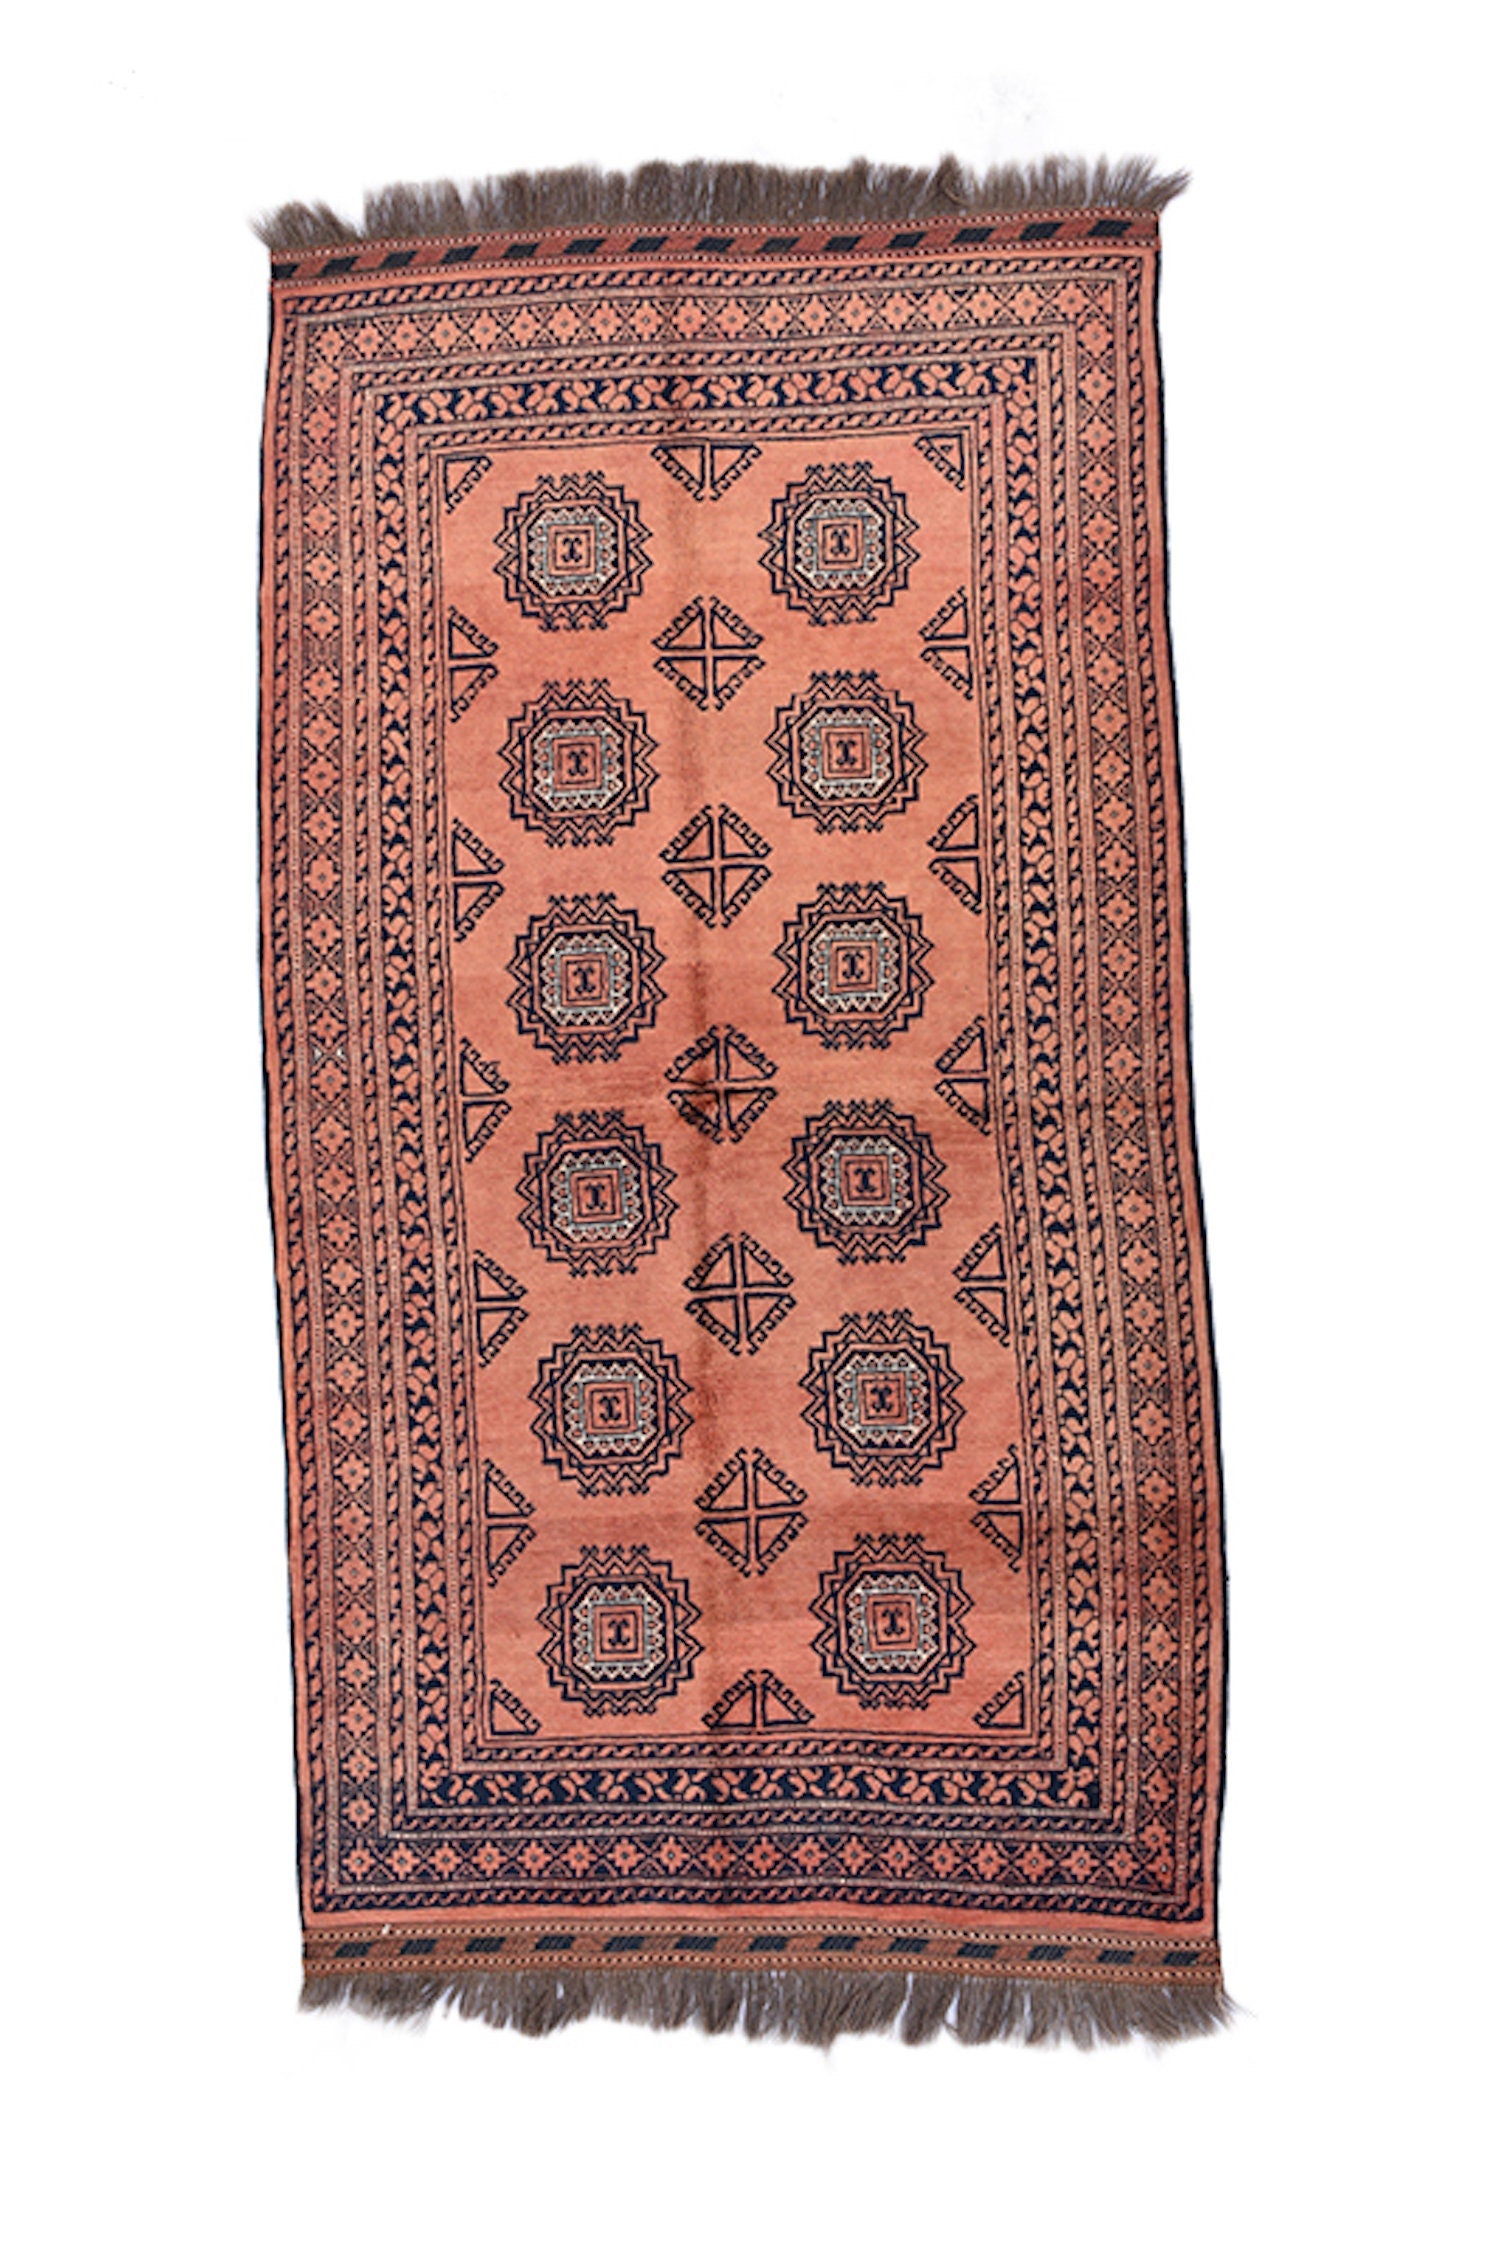 Coral Kashmiri 3x6 Vintage Rug | Antique Pakistan Rug with Multi Hexagon Design | Pure Wool Hand Knotted | Vintage Rug Shop